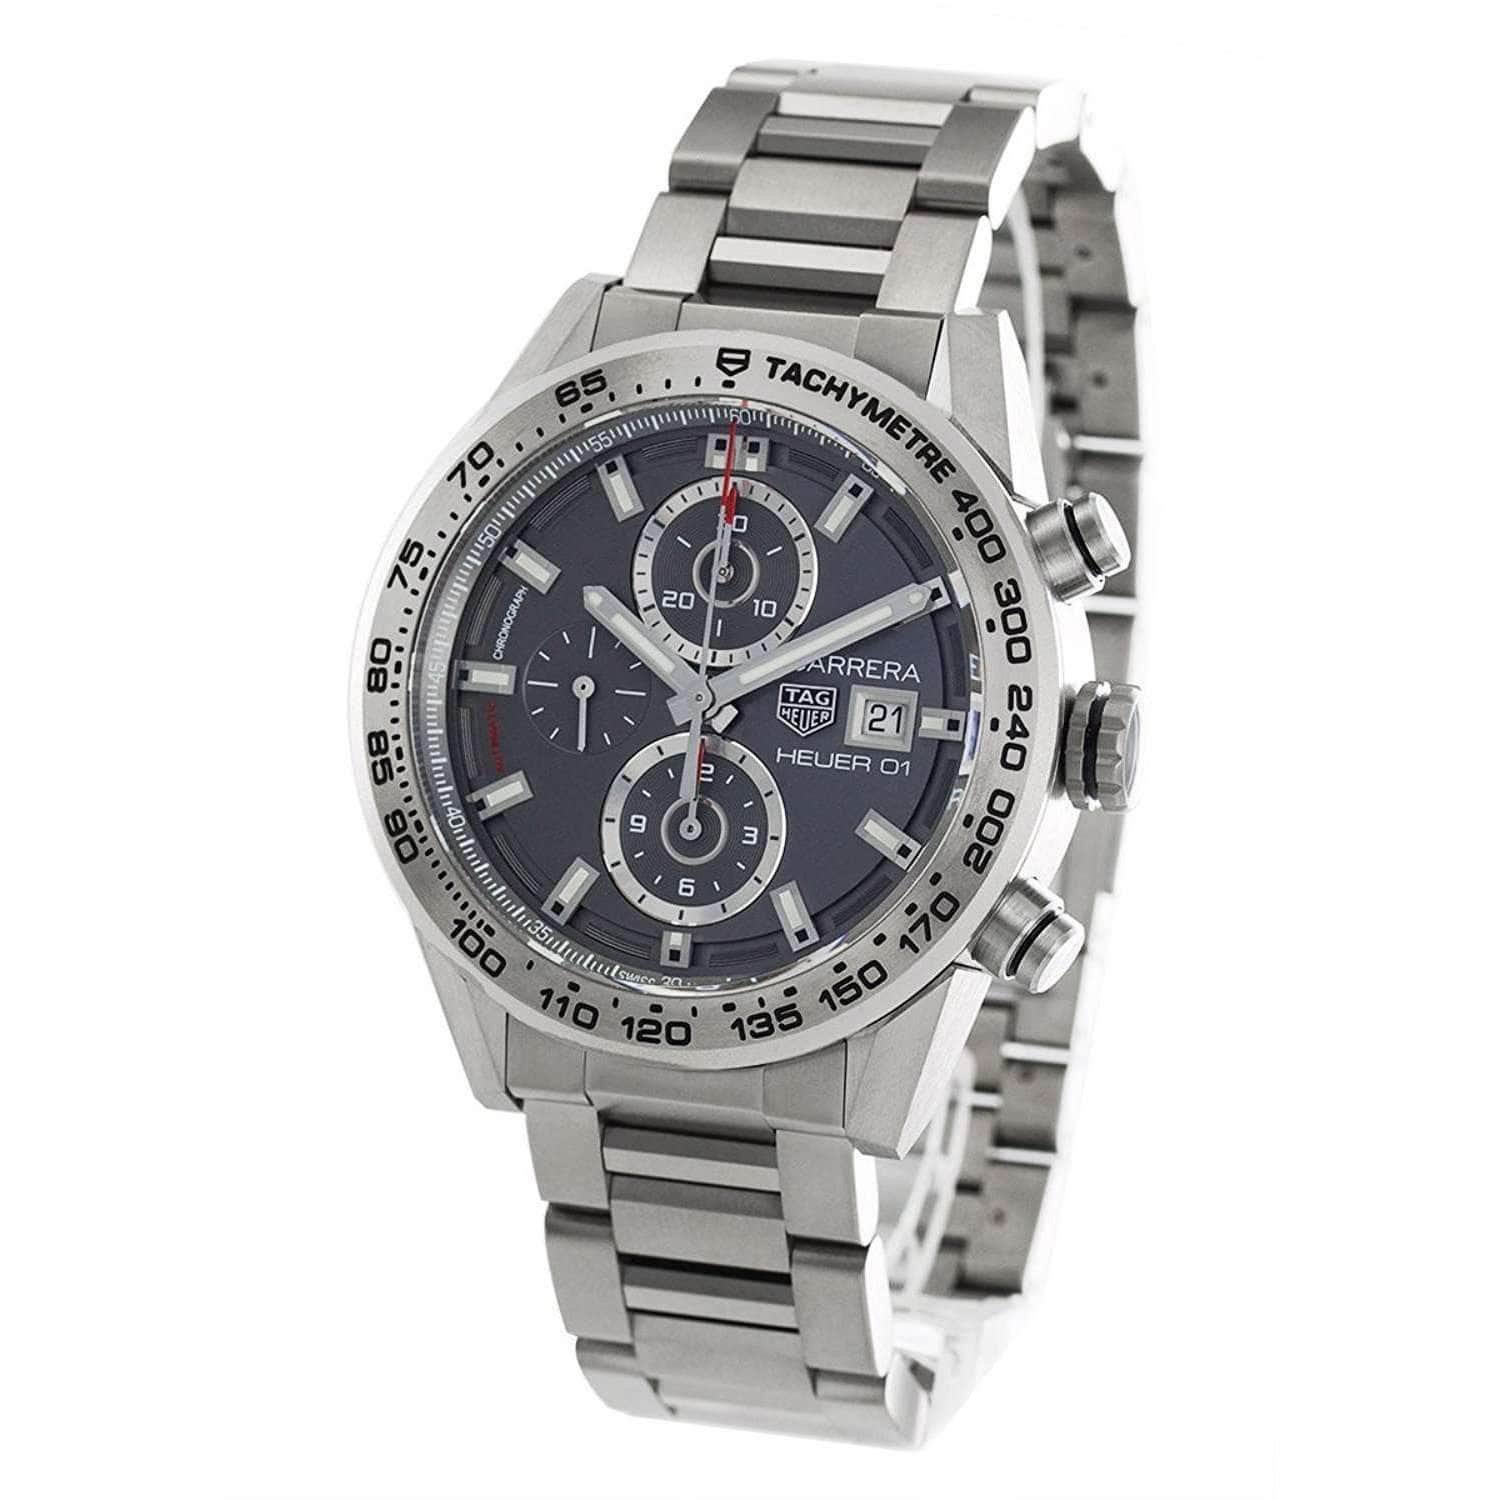 ROOK JAPAN:TAG HEUER CARRERA AUTOMATIC CHRONOGRAPH MEN WATCH CAR208Z.BF0719,Luxury Watch,Tag Heuer Carrera